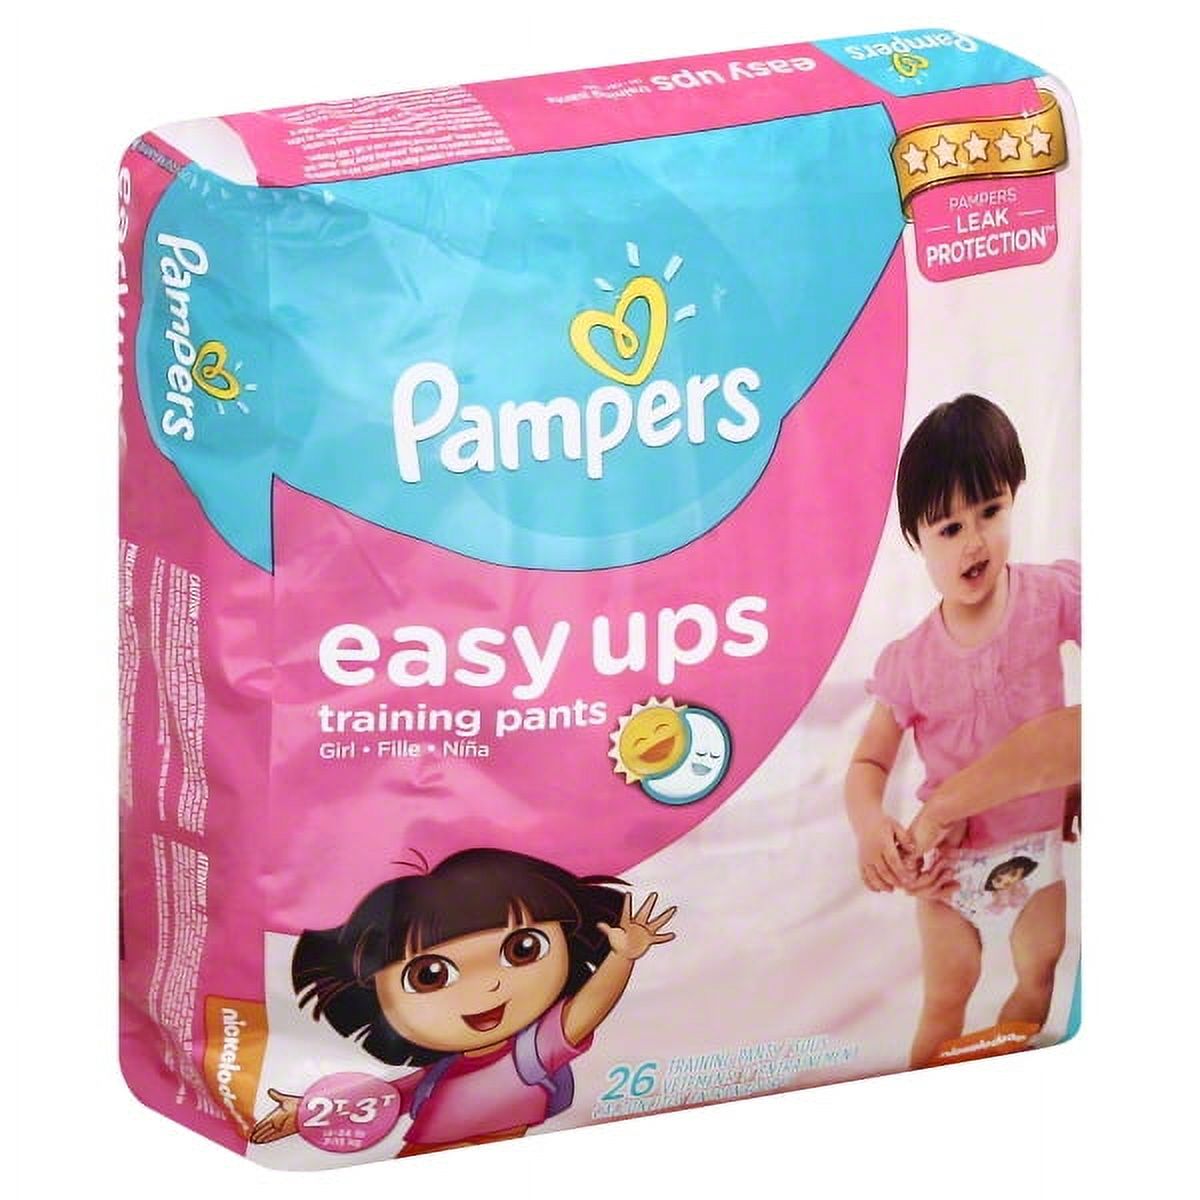 Pampers Pamp Easy Ups Jp 2t-3t Girl - image 1 of 7